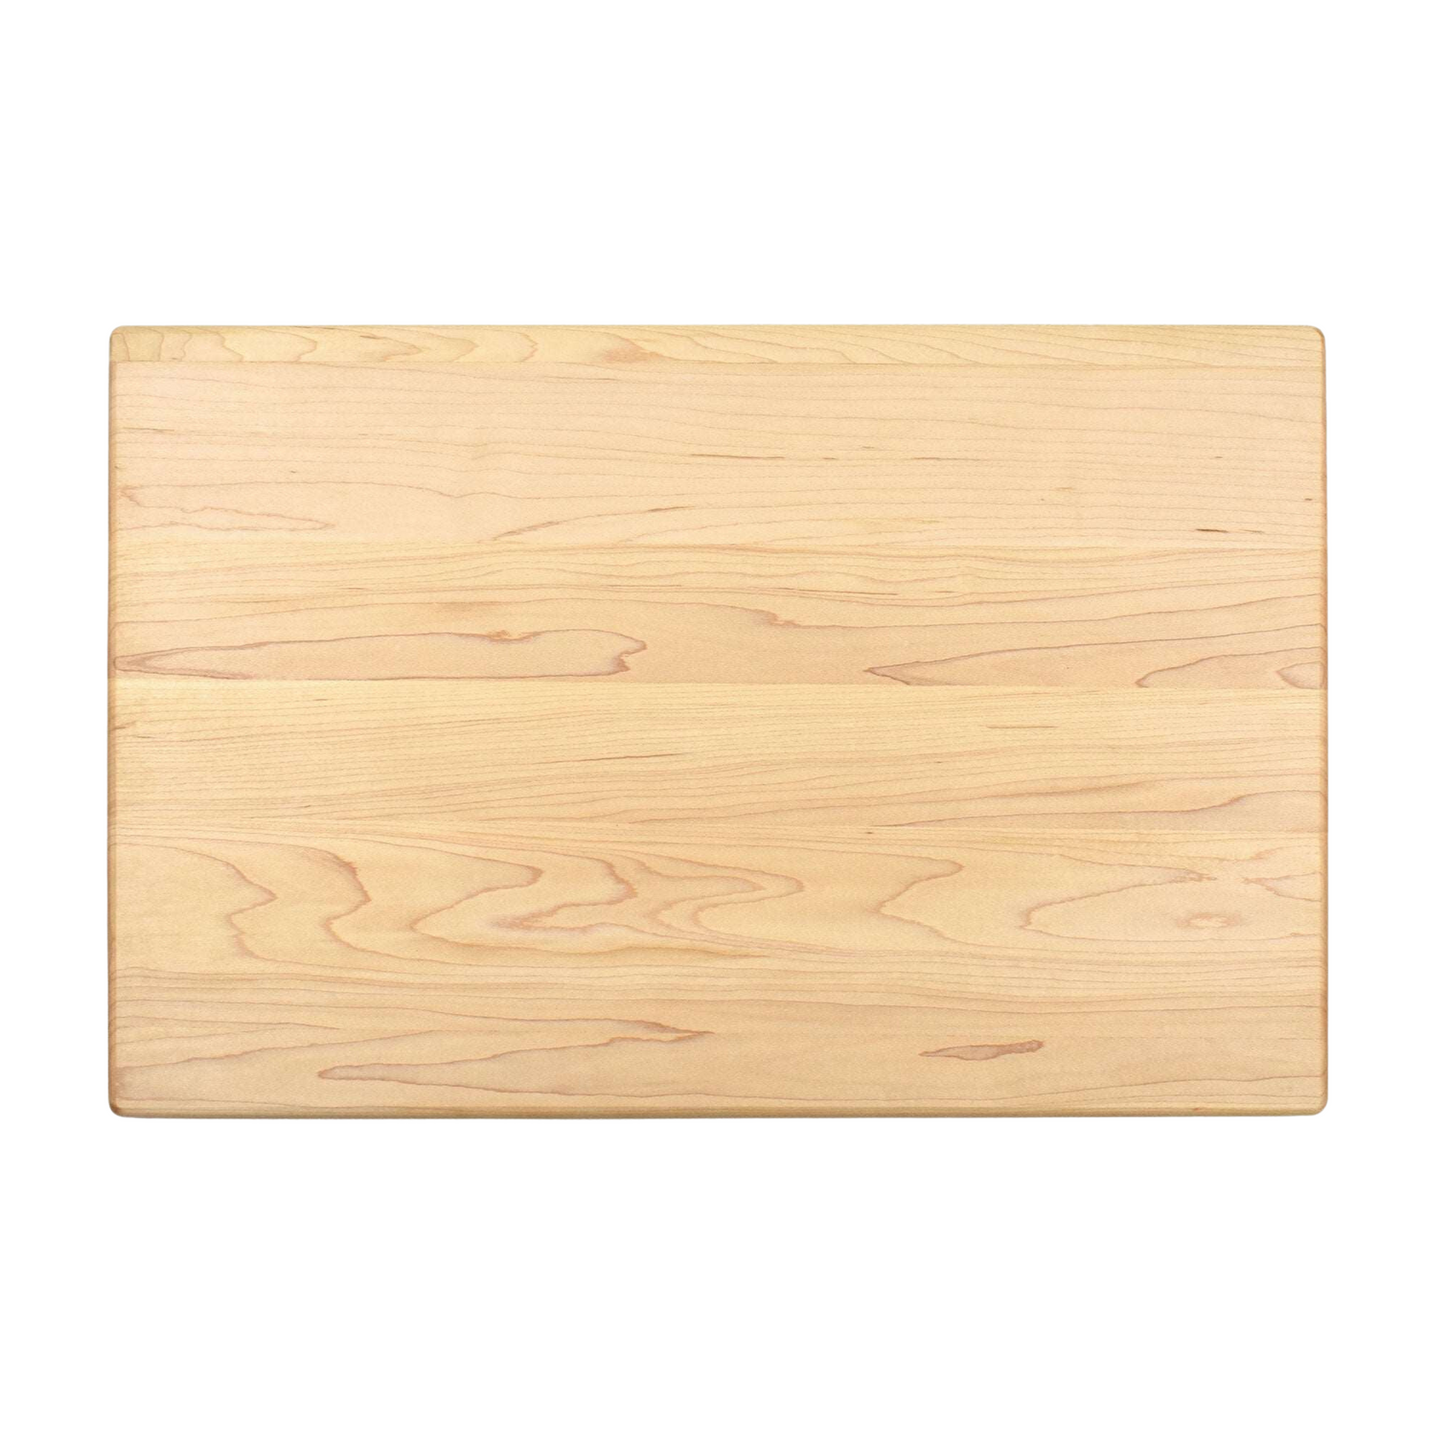 Eat Drink & Wear Stretchy Pants Cutting Board - Premium Cutting Boards from Hipster Lasers - Just $90! Shop now at Hipsterlasers